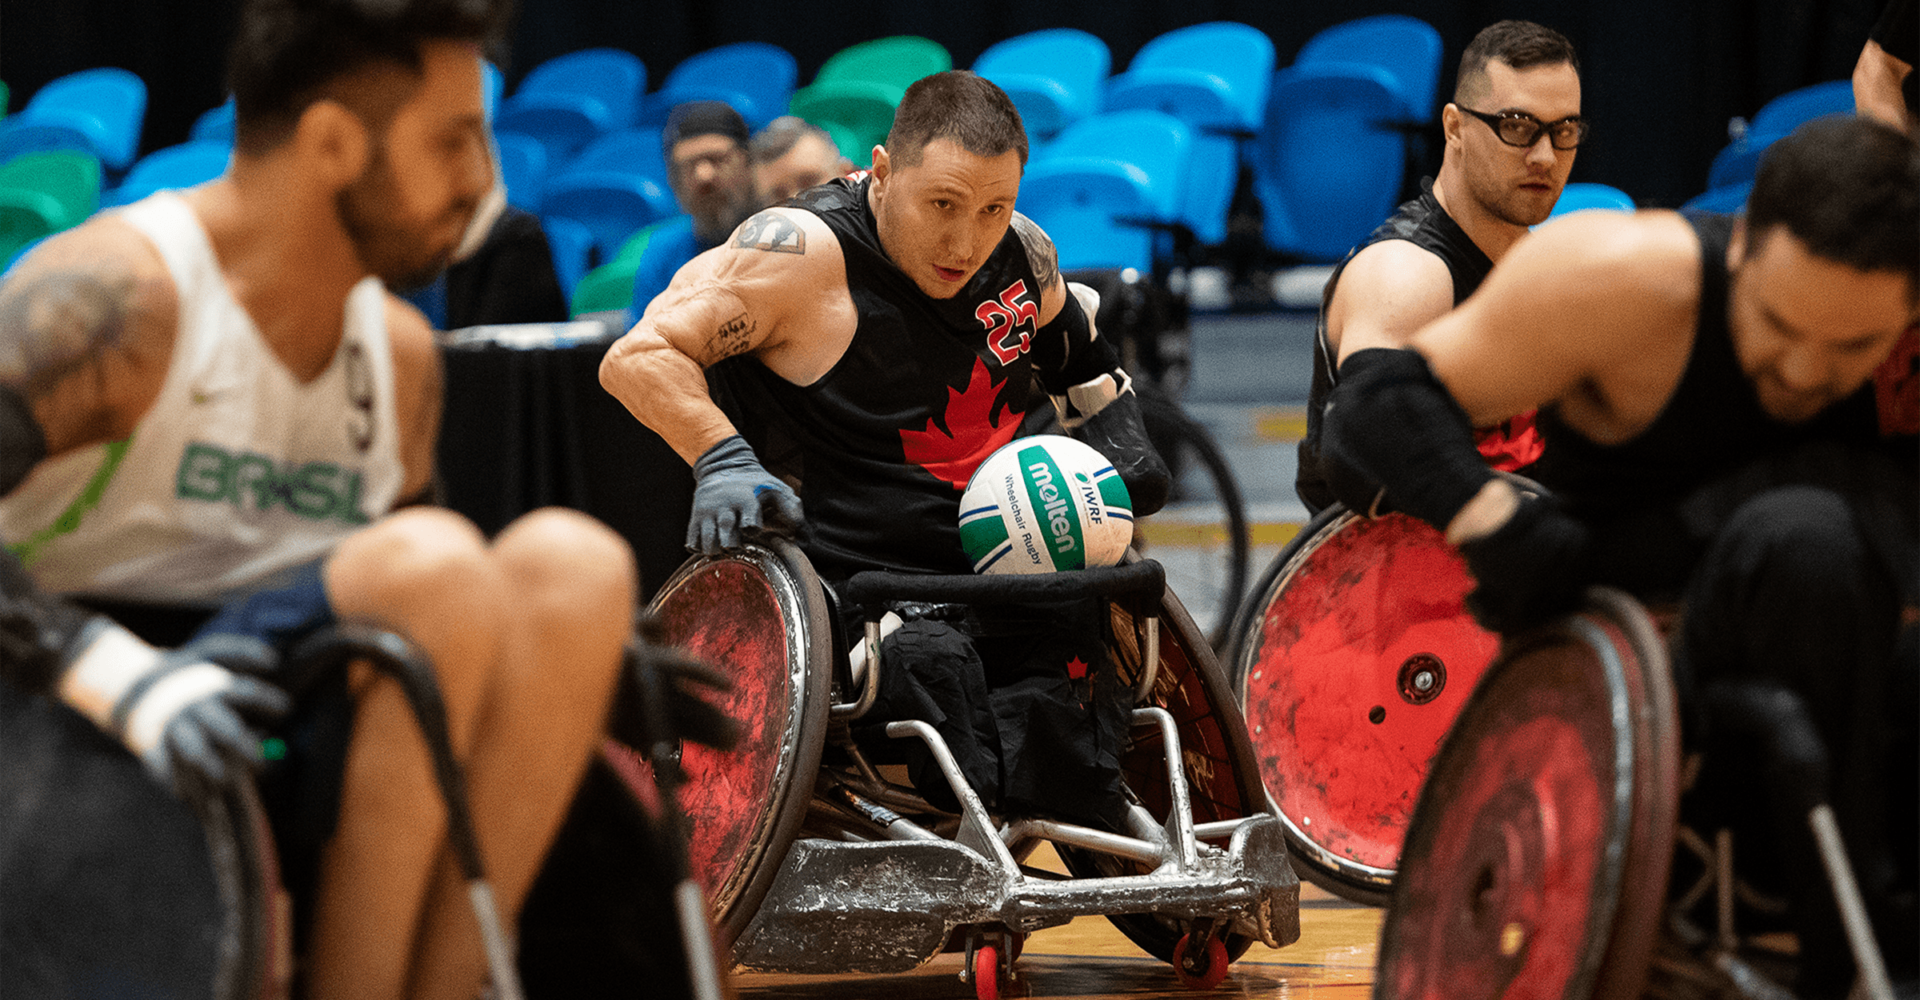 CANADA UNDEFEATED AT WHEELCHAIR RUGBY PARALYMPIC GAMES QUALIFIER